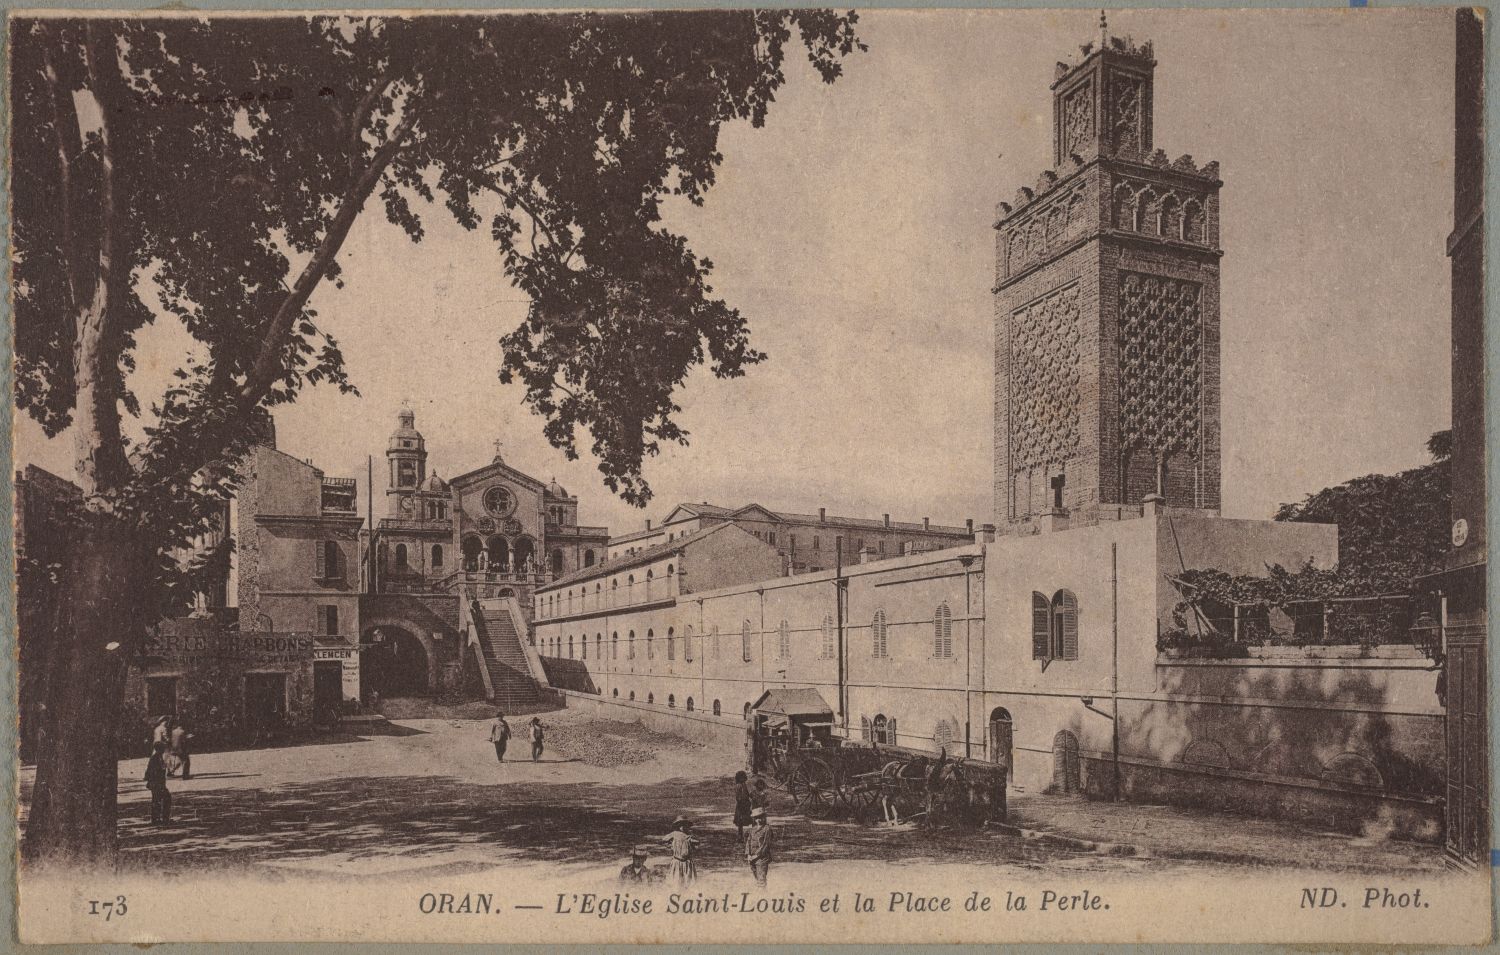 View of the square toward the church, mosque on the right.